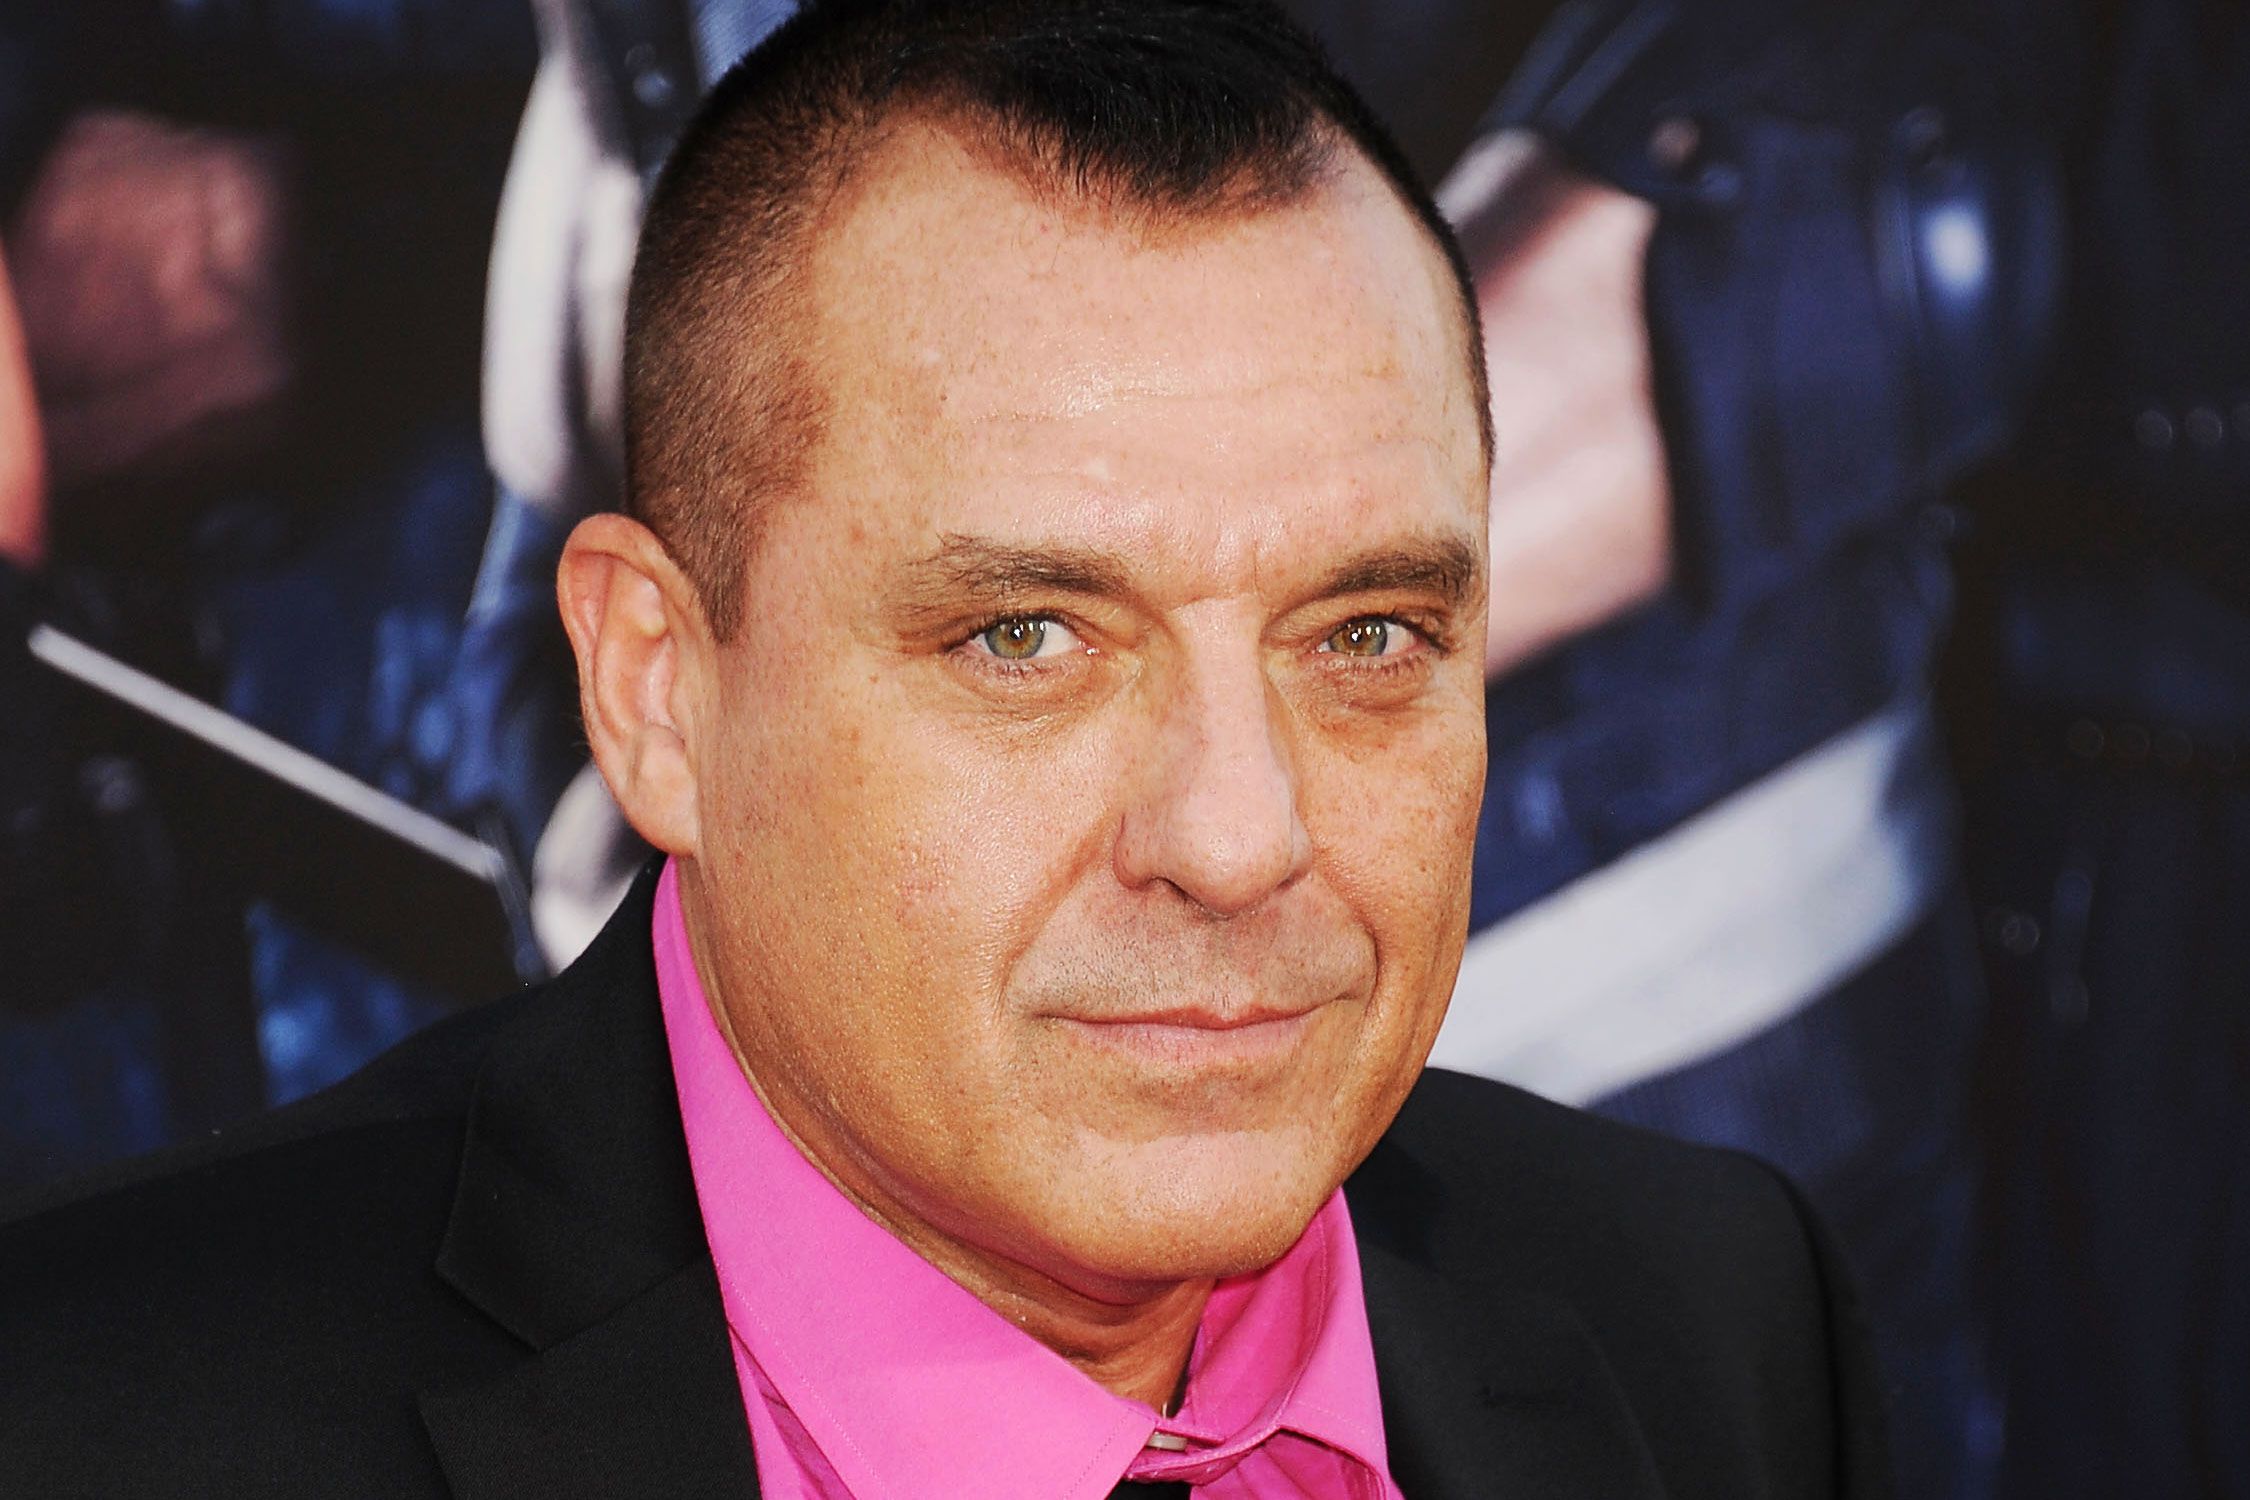 Tom Sizemore Made You Uncomfortable pic